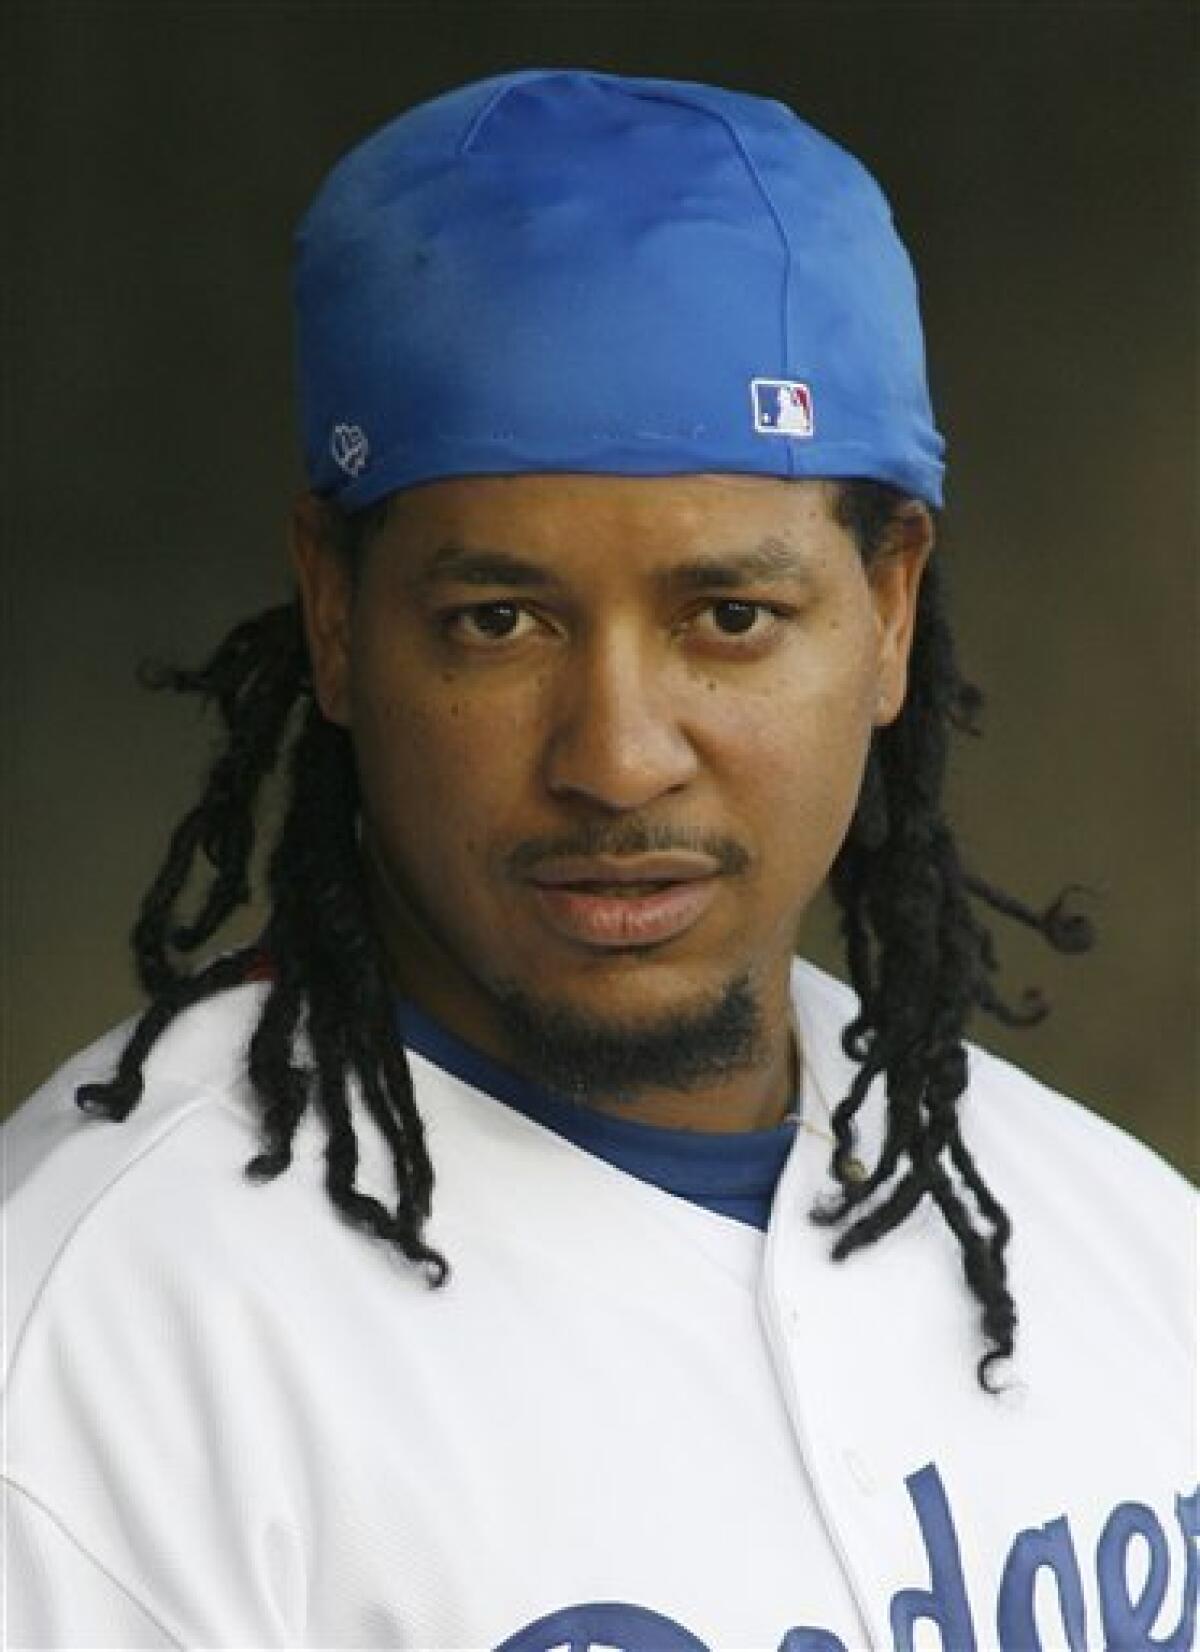 Boston Red Sox Manny Ramirez, with his hair in dread locks, is shown during  batting practice before his team's spring training baseball game against  the Baltimore Orioles in Ft. Lauderdale, Fla., Wednesday